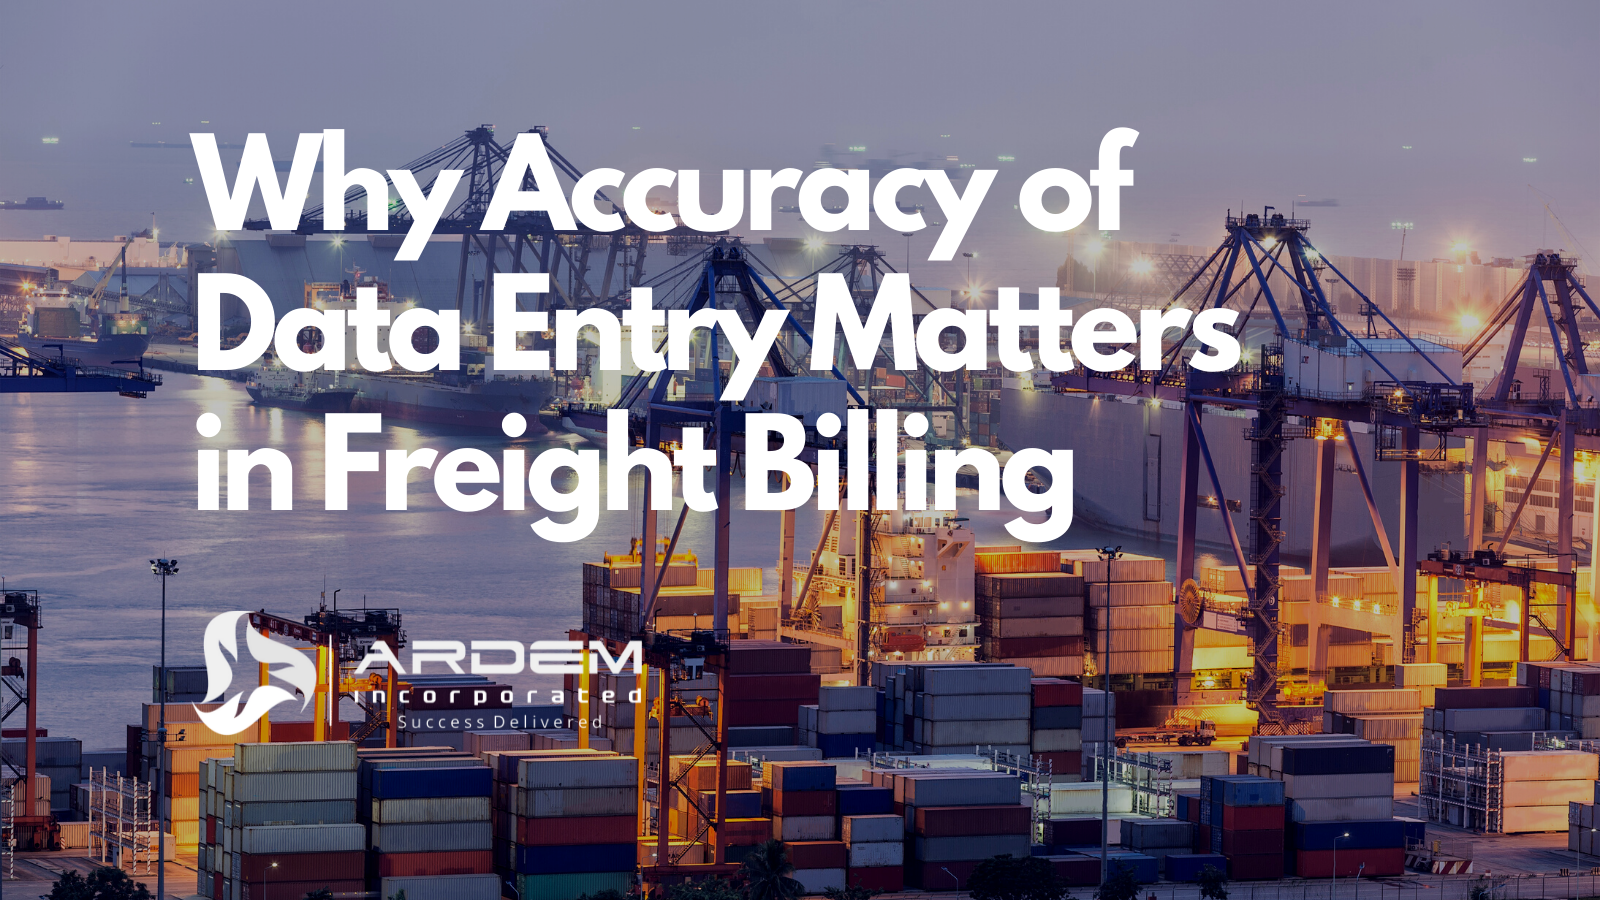 Freight billing data entry